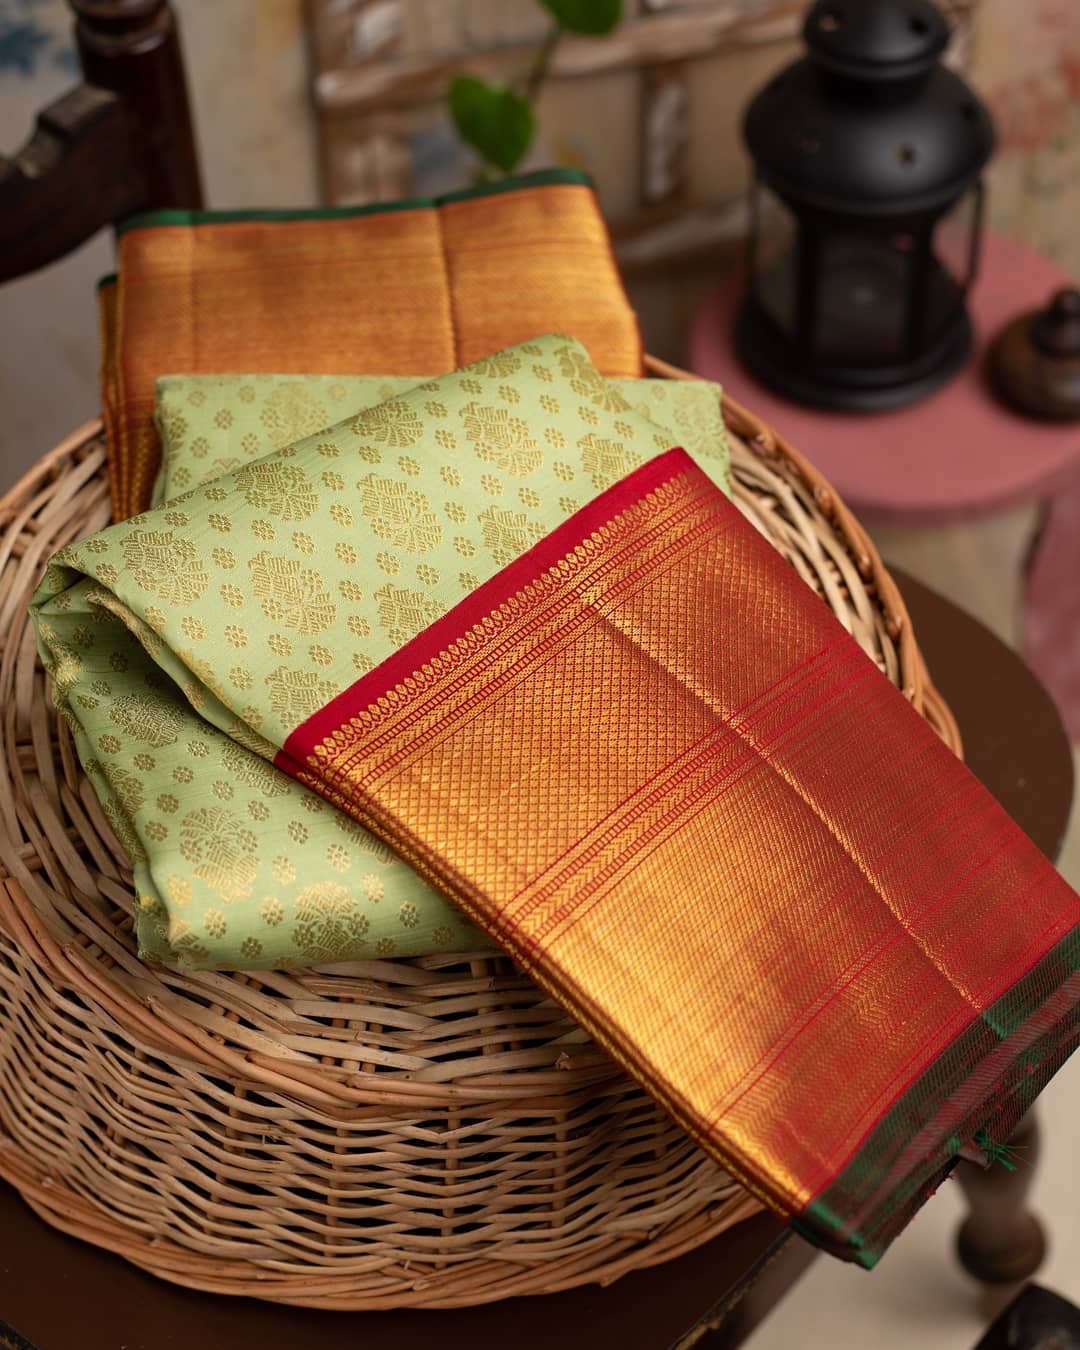 LIght Green and Red Kanjeevaram Saree with For Women